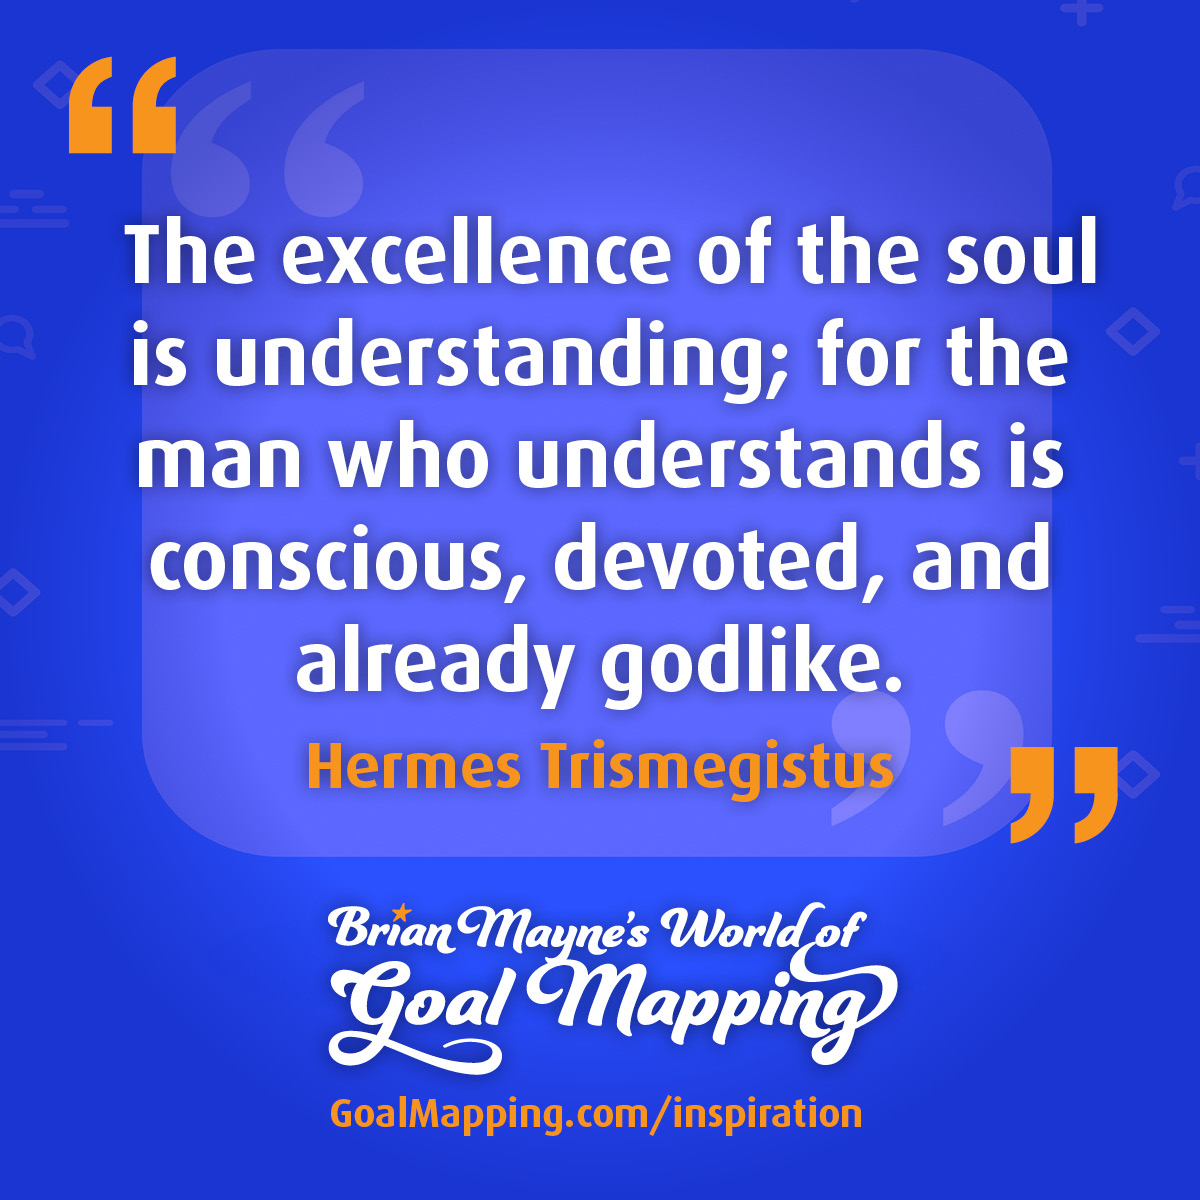 "The excellence of the soul is understanding; for the man who understands is conscious, devoted, and already godlike." Hermes Trismegistus